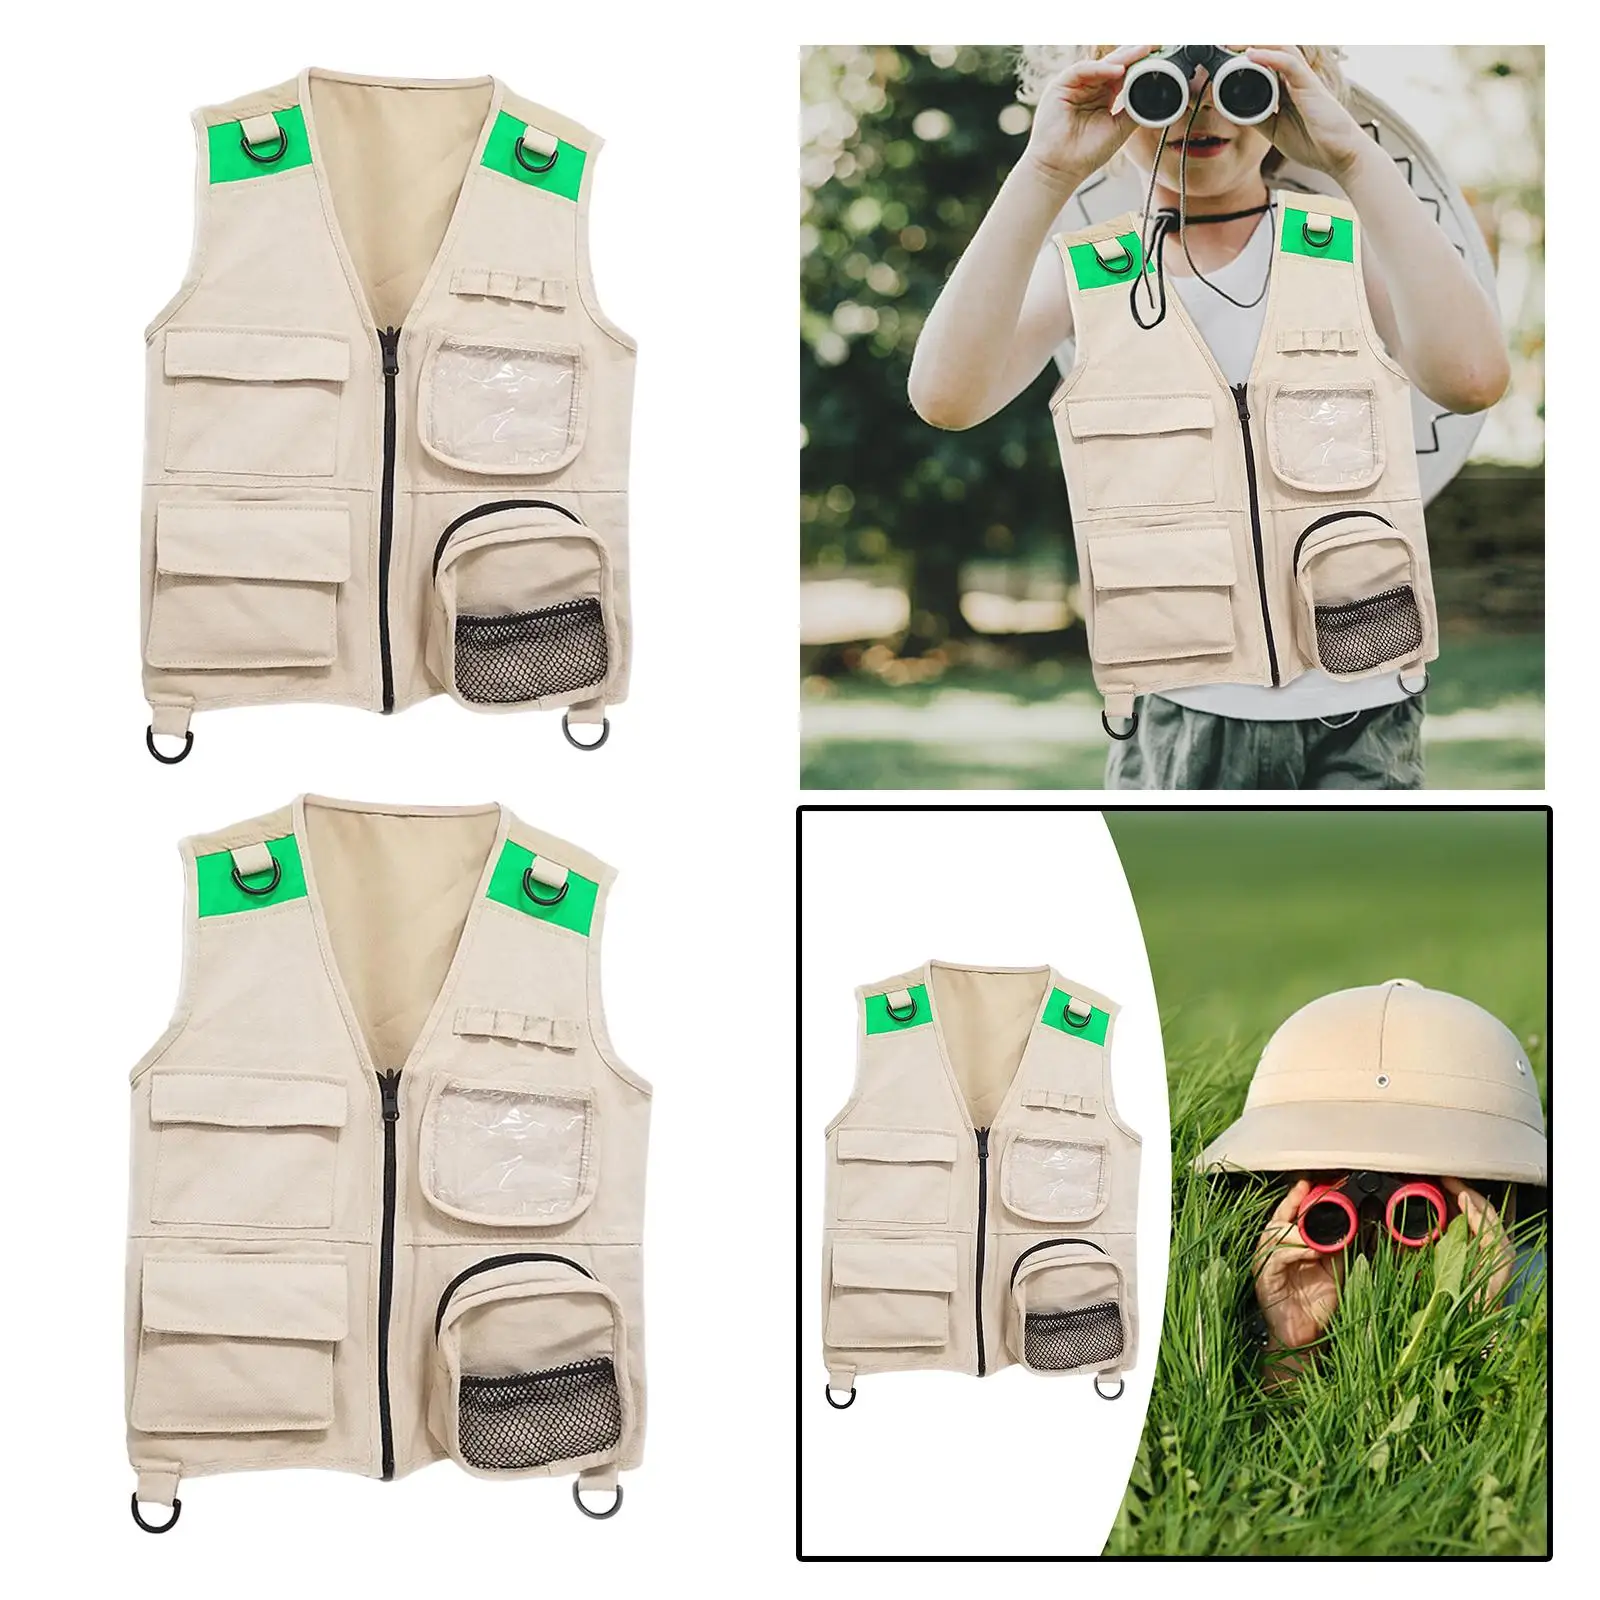 Kids Costume Vest Cargo Vest Dress Up for Party Favors Hiking Zoo Keeper